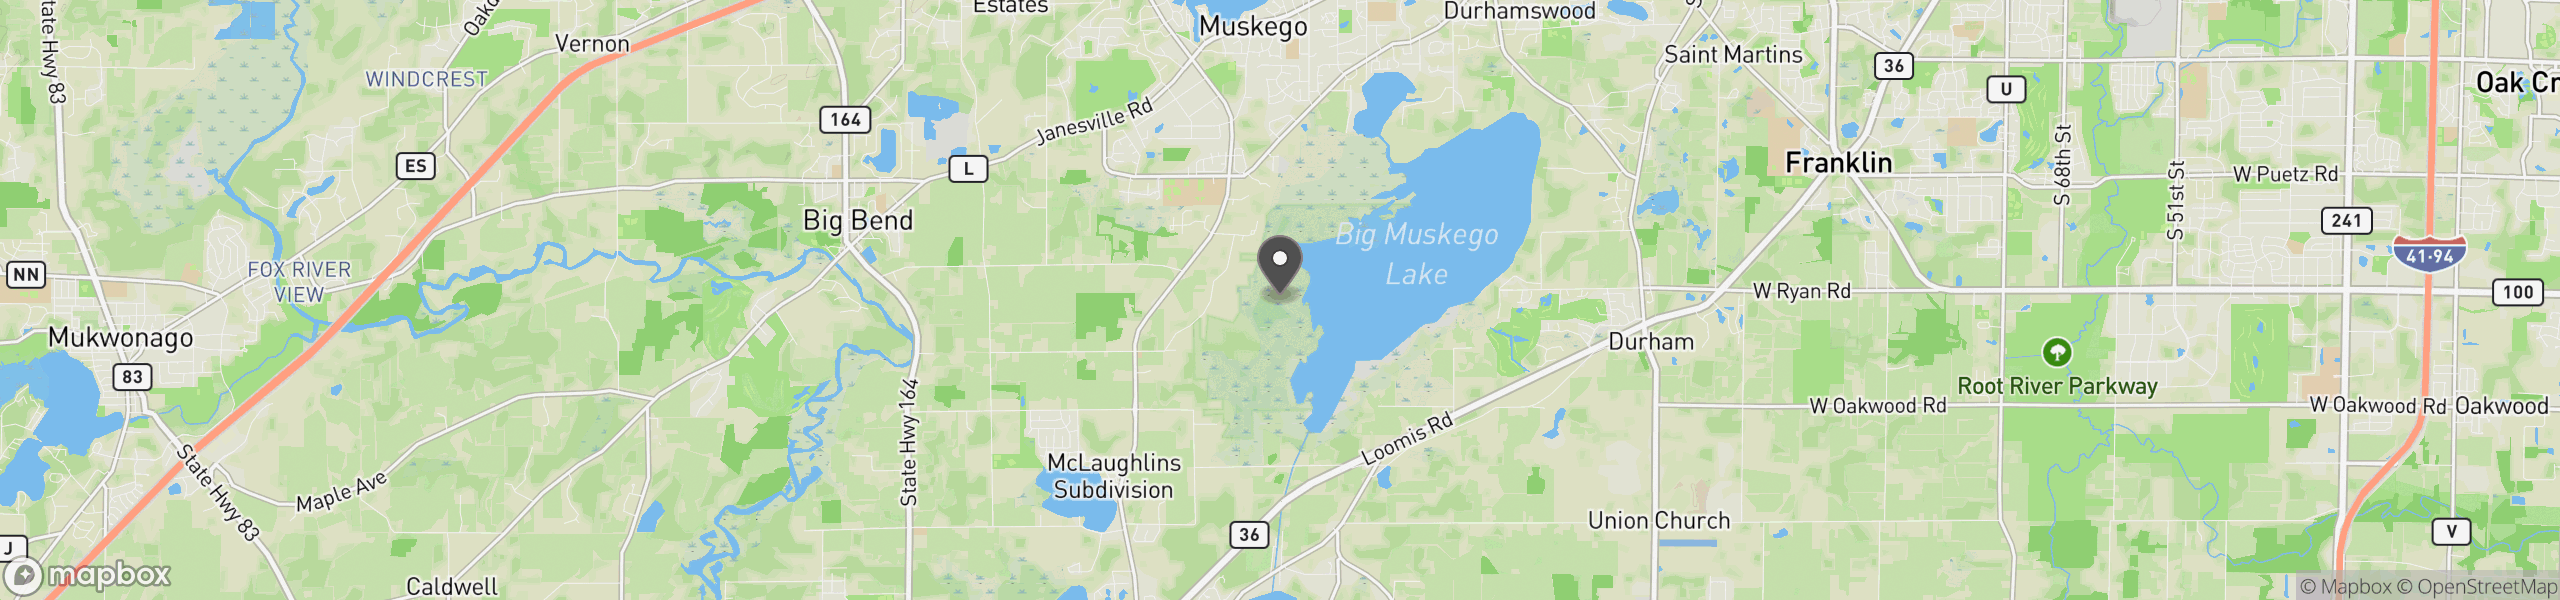 Muskego, WI 53150